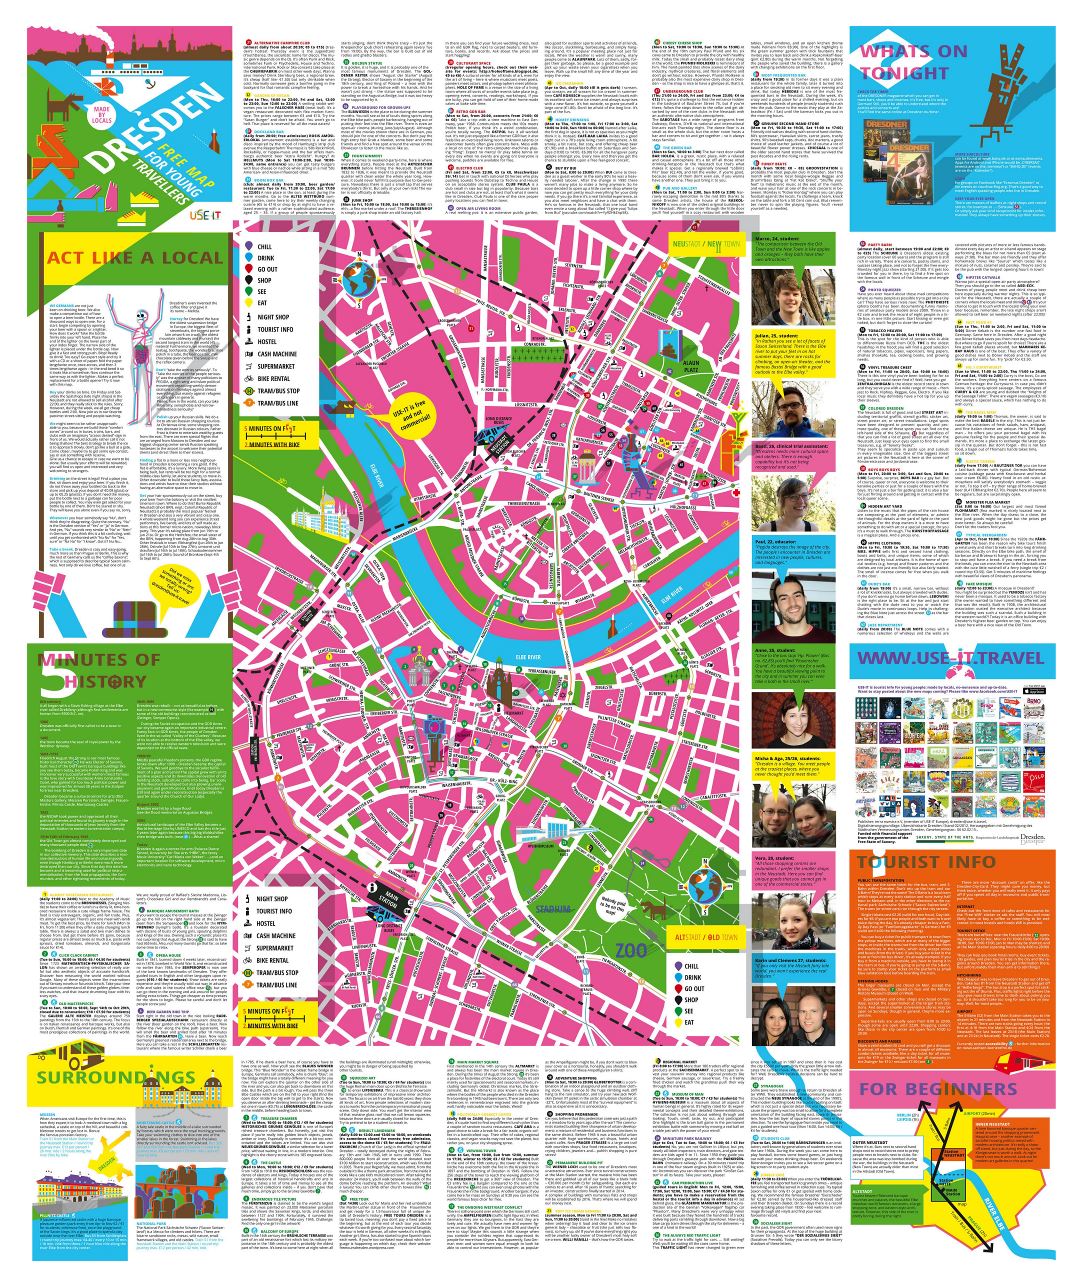 Large scale tourist map of Dresden